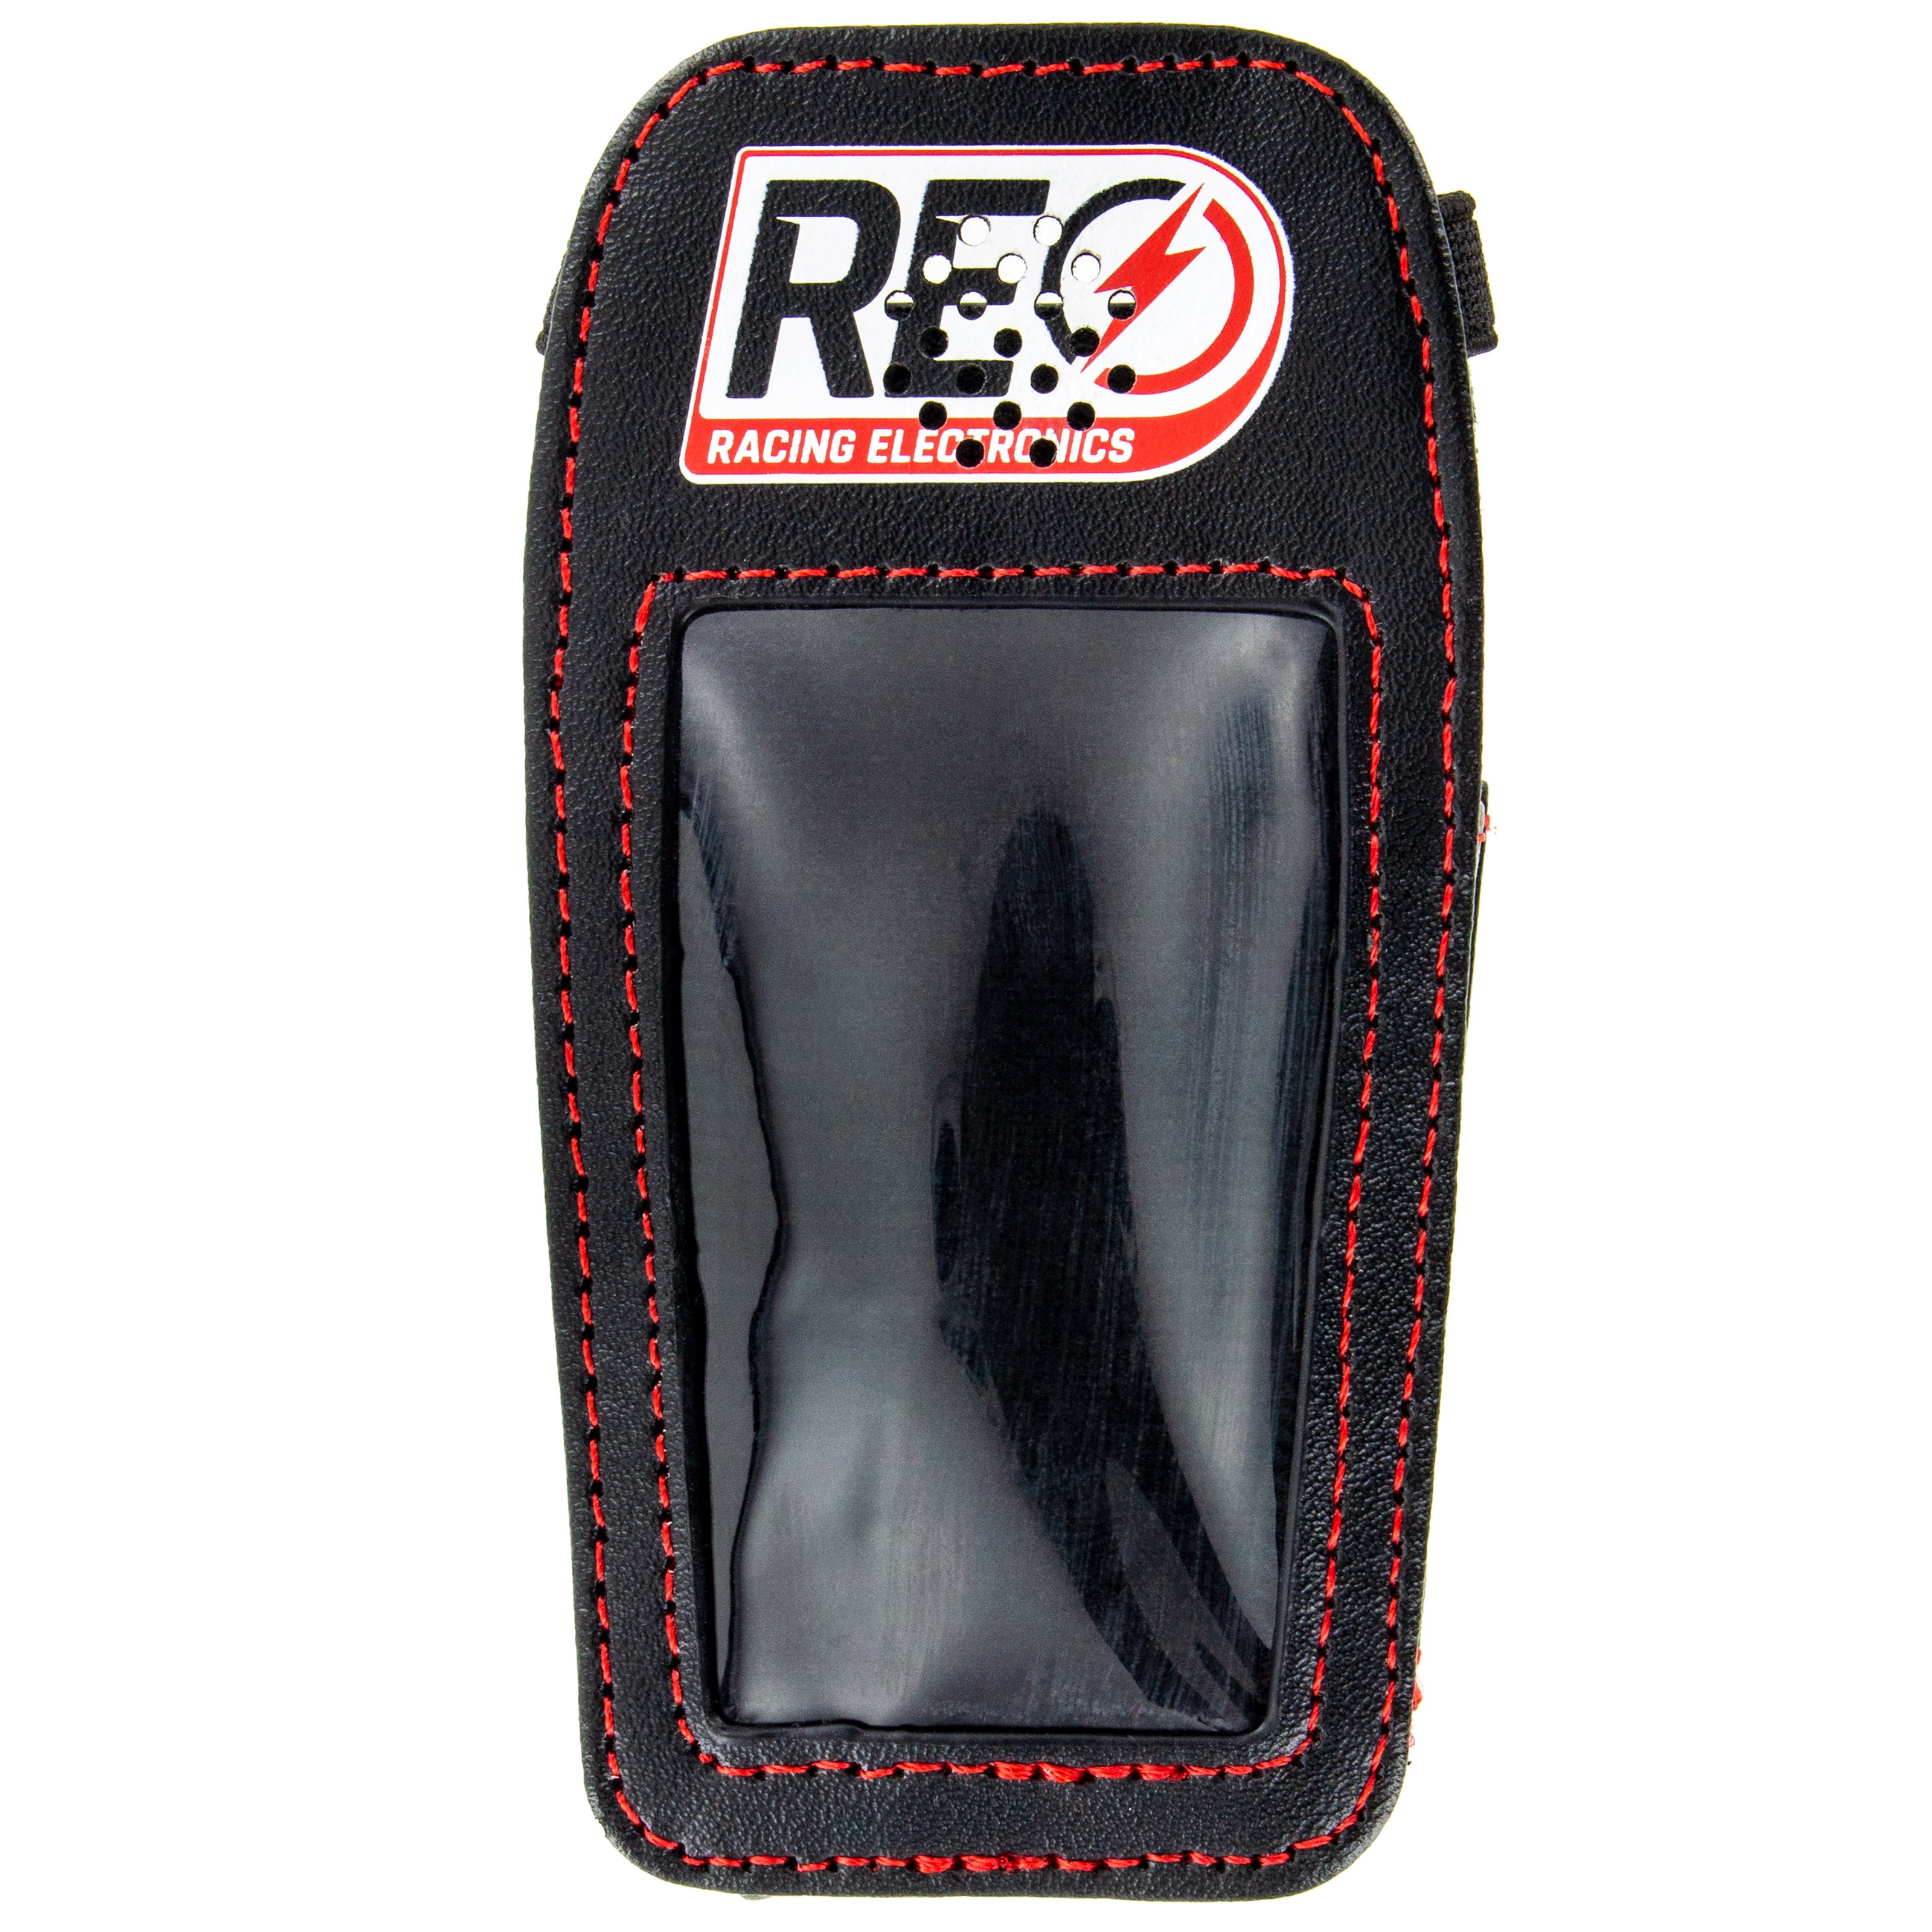 CASE - RE3000 AND RE1000 – Racing Electronics